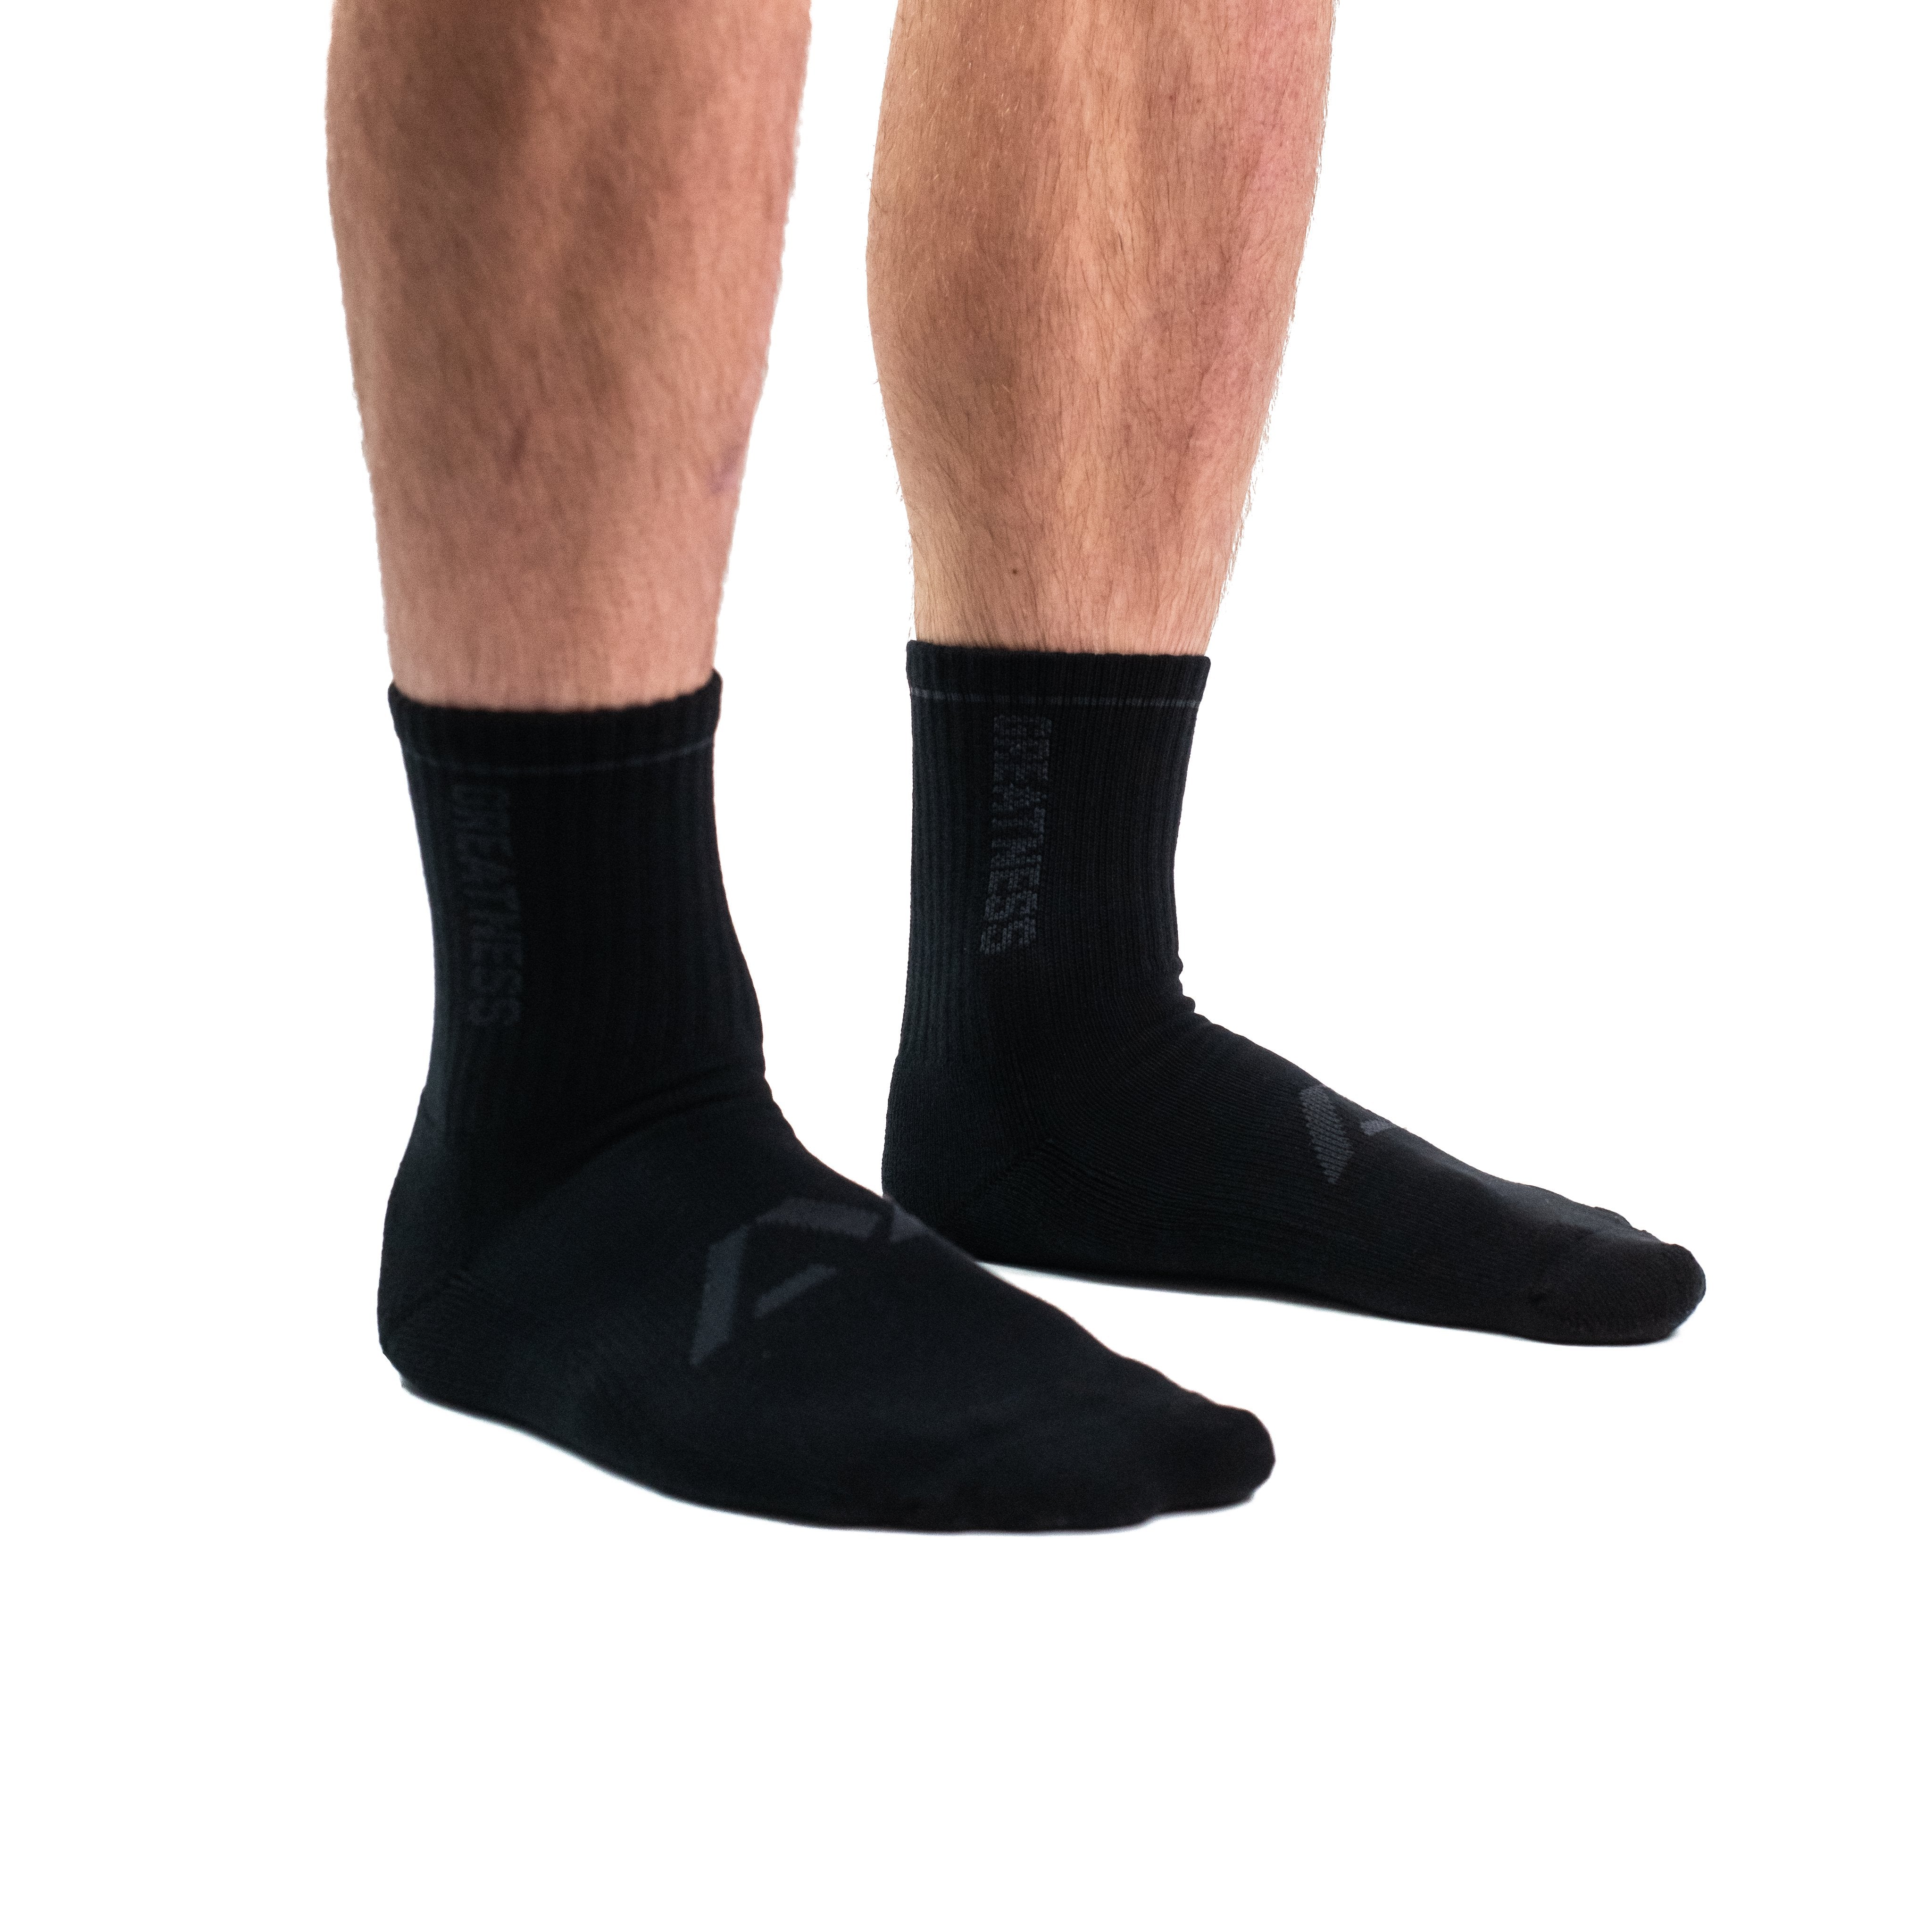 This Stealth Crew socks were created with muted out the logos and keep contrast at a minimum and let your energy show on the platform, in your training or while out and about. Our Crew socks offer a level of comfort like no other through their unique blend of materials and stretch in the places you desire for an ultra comfortable sock.